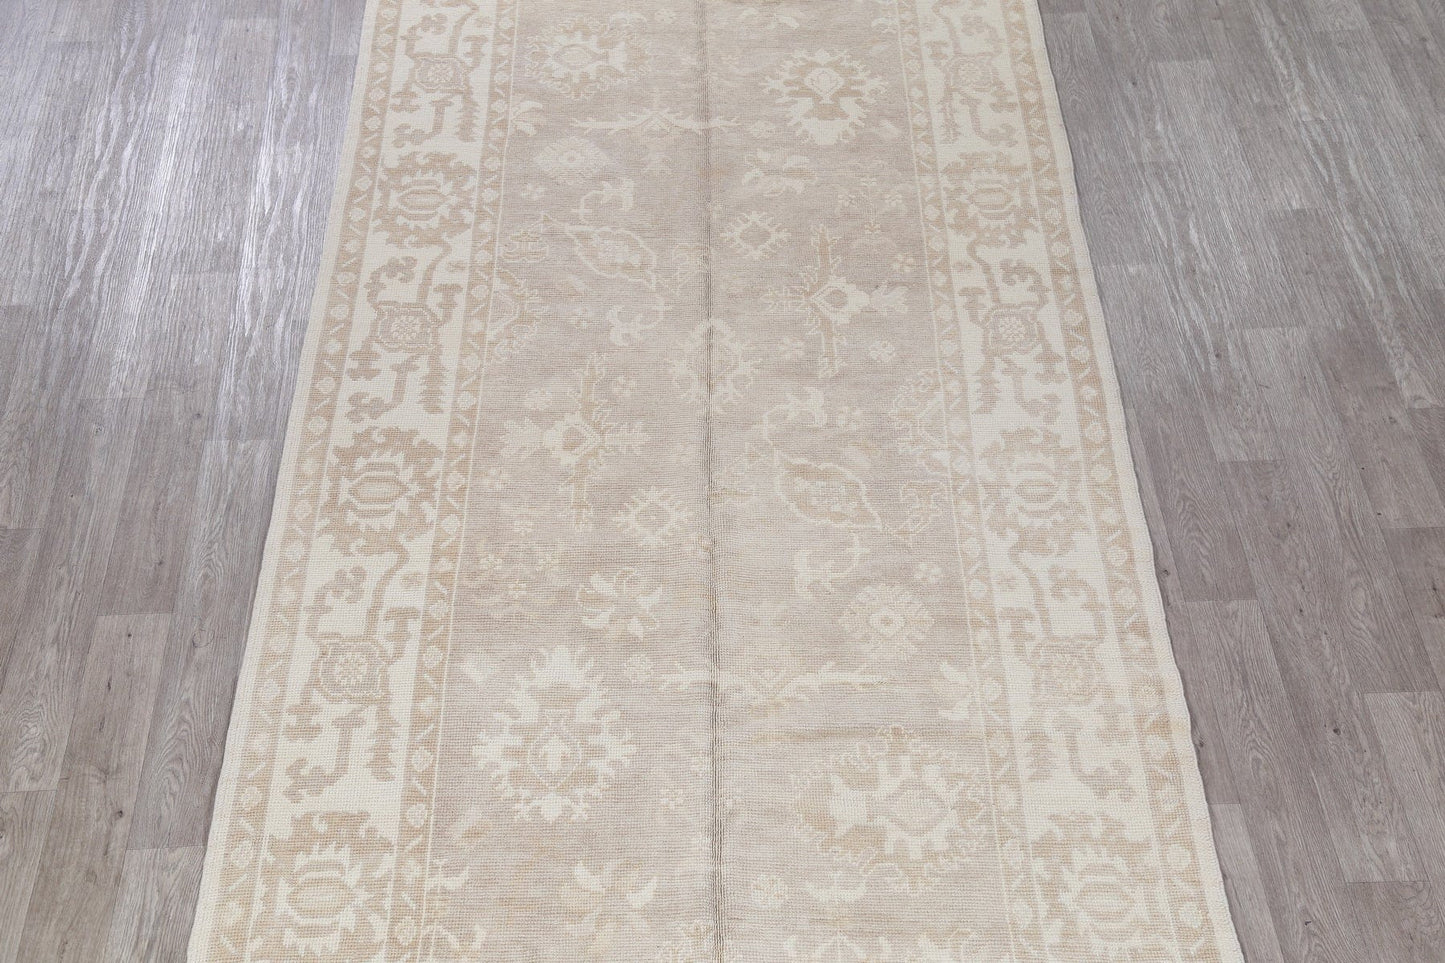 Vegetable Dye Muted Oushak Turkish Hand-Knotted Runner Rug 6x17